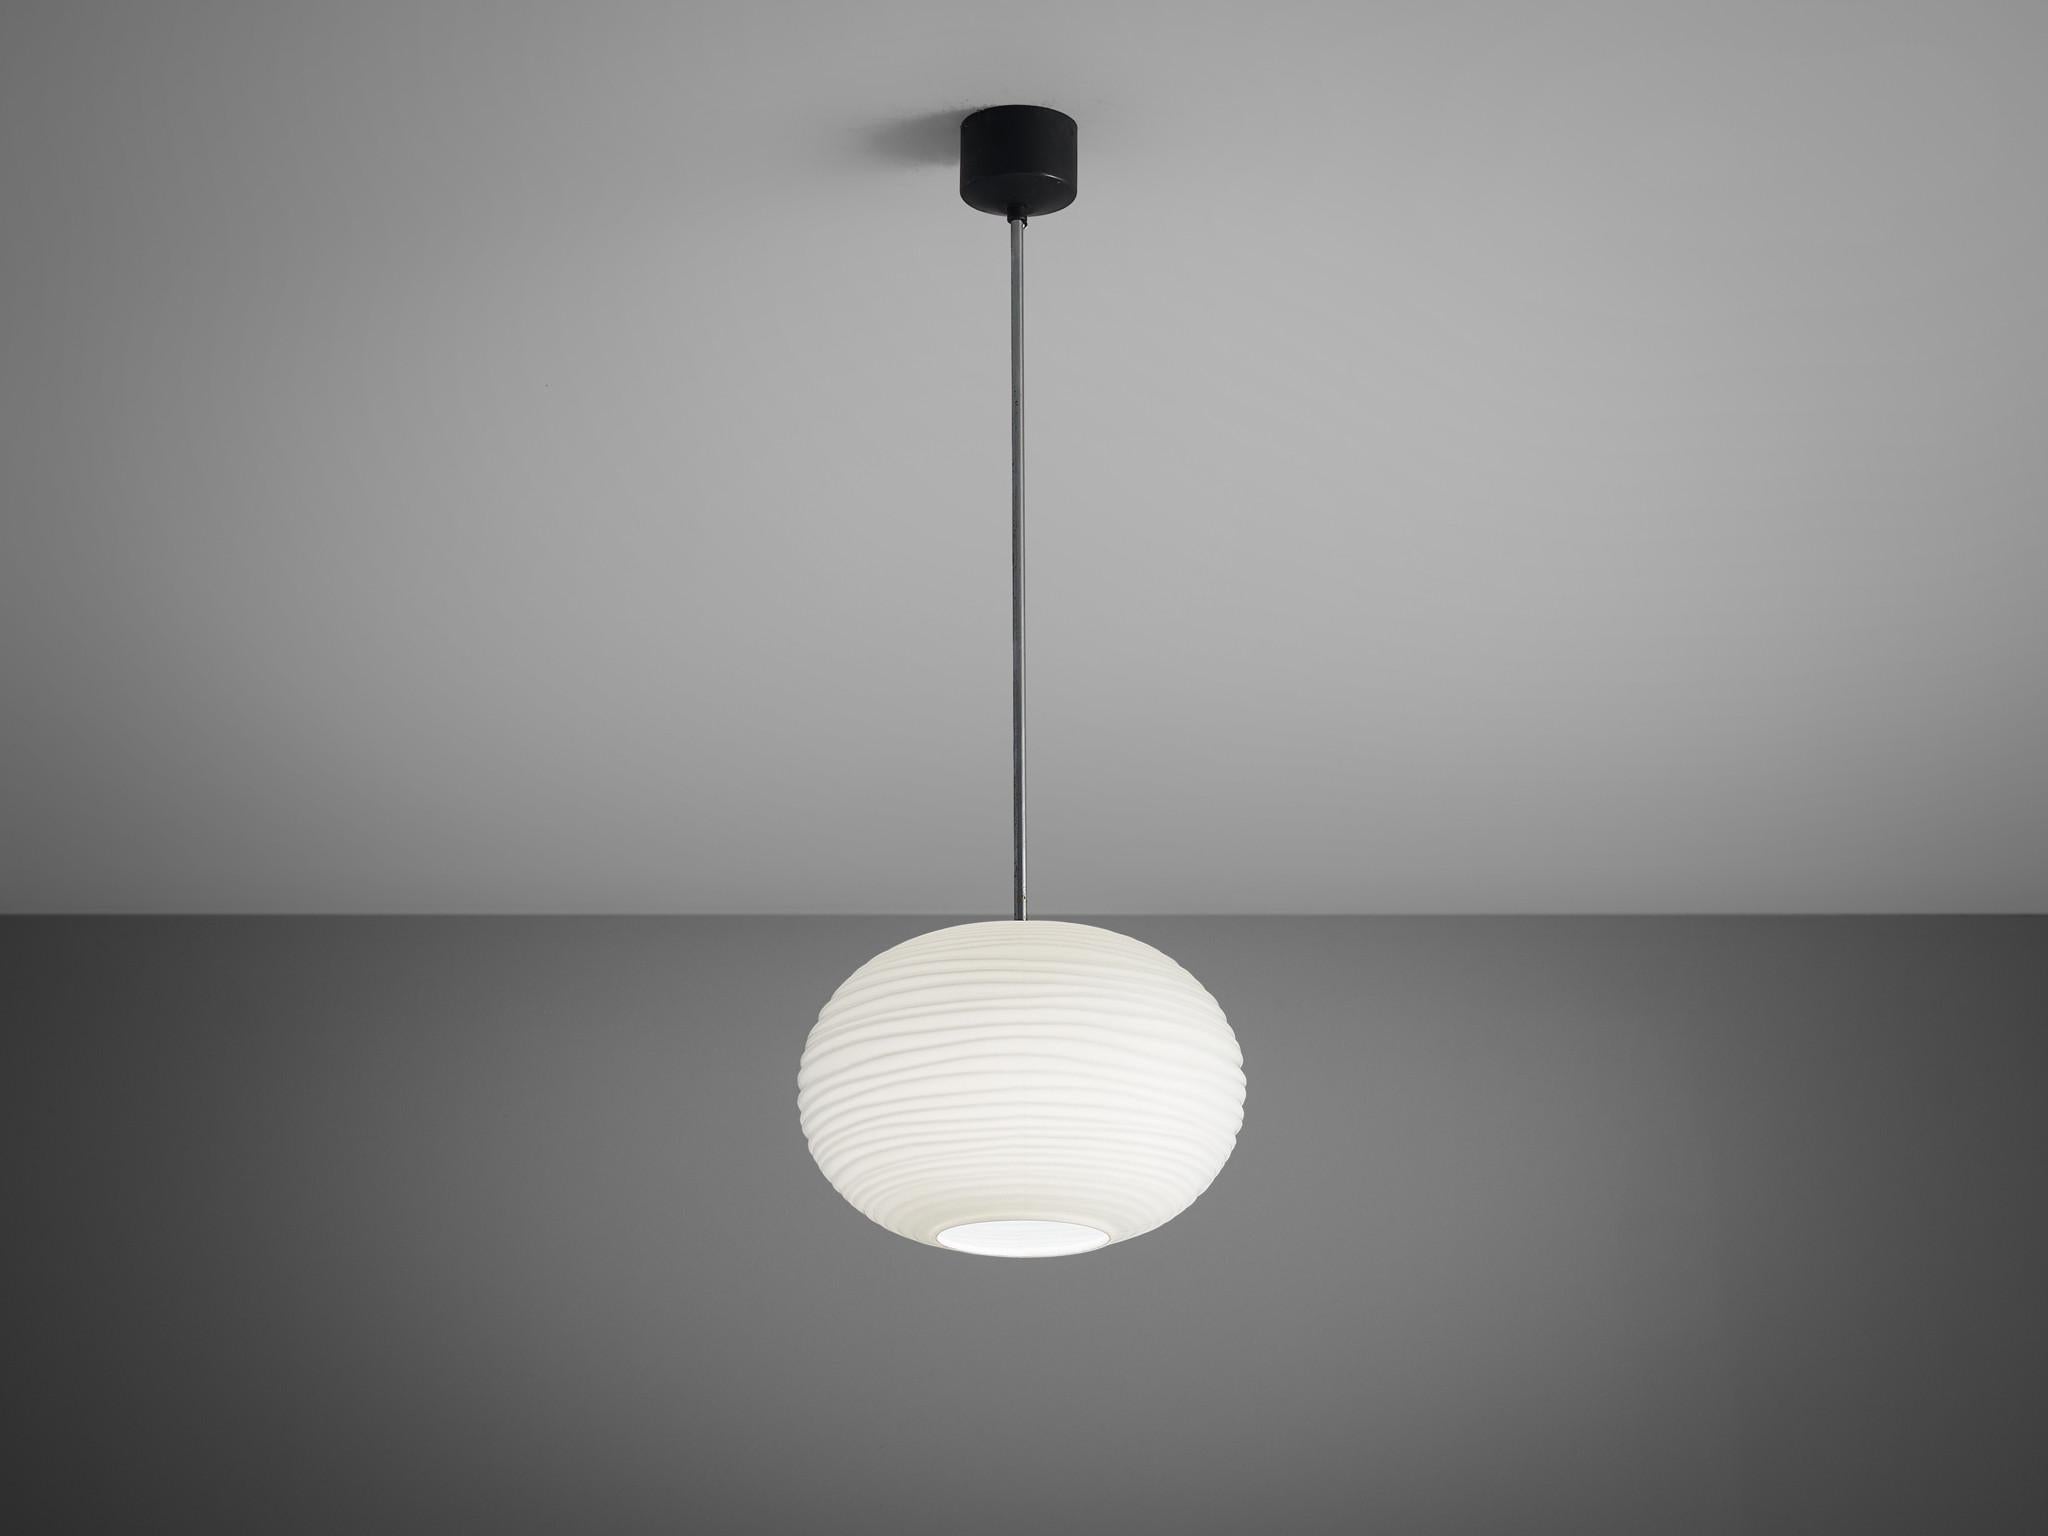 Pendants, glass, metal, Europe, 1970s

Very elegant ceiling lamps with large matte white shades defined by organically rippled surfaces. The lamp radiates an ambient light partition. The lamp is closed to the ceiling with a black lacquered mounting.